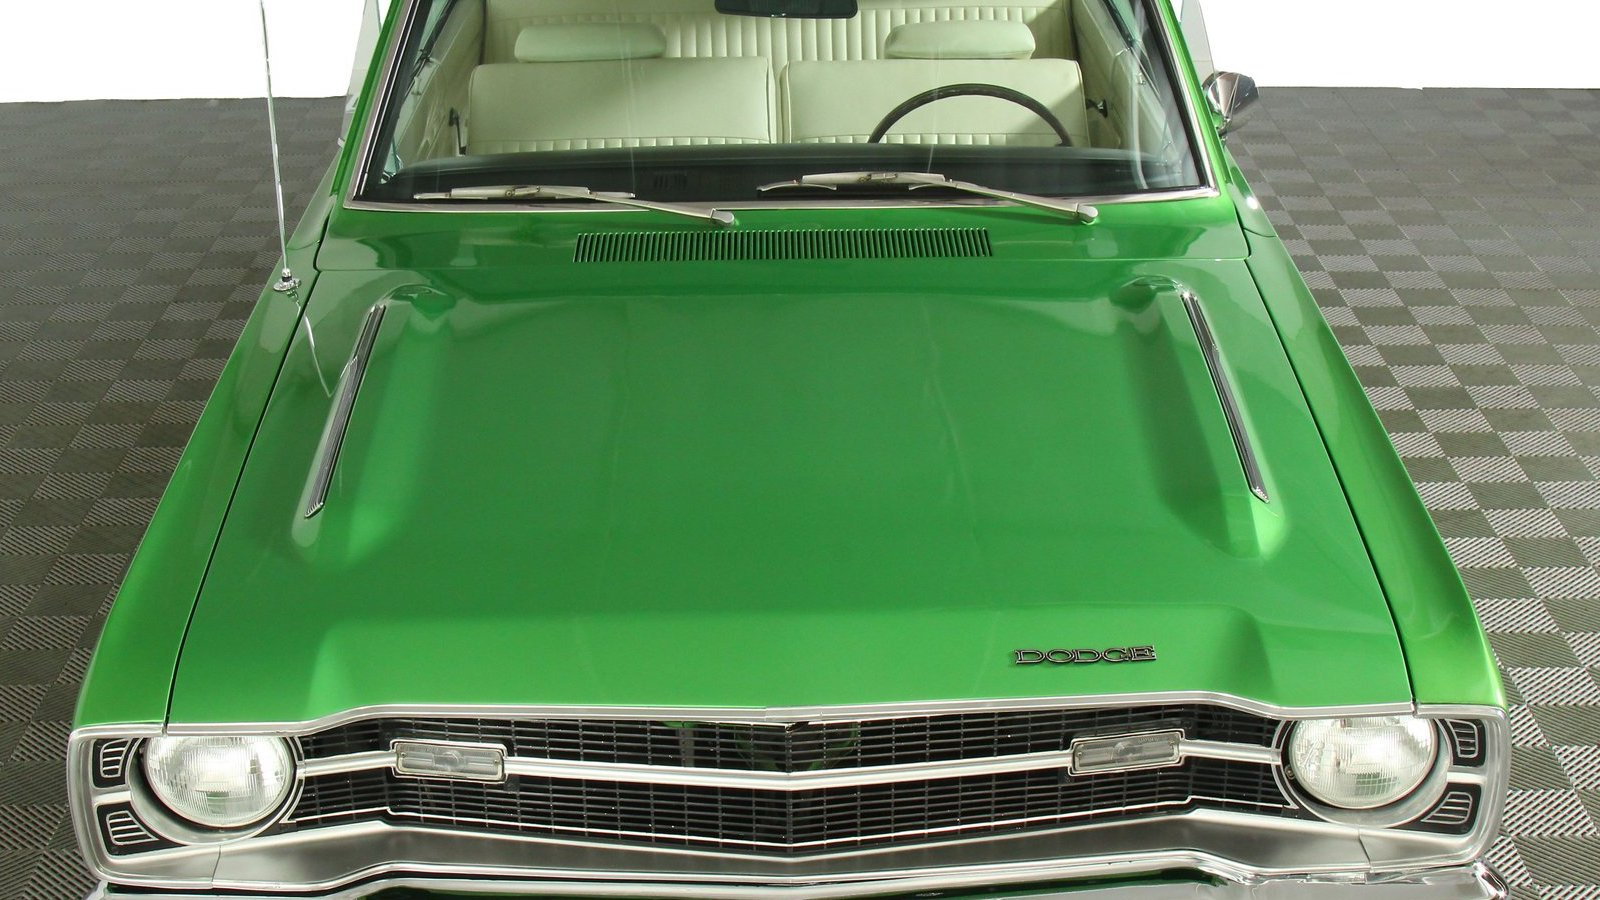 Mean Green 1969 Dart Makes Other Drivers Envious Dodgeforum photo image